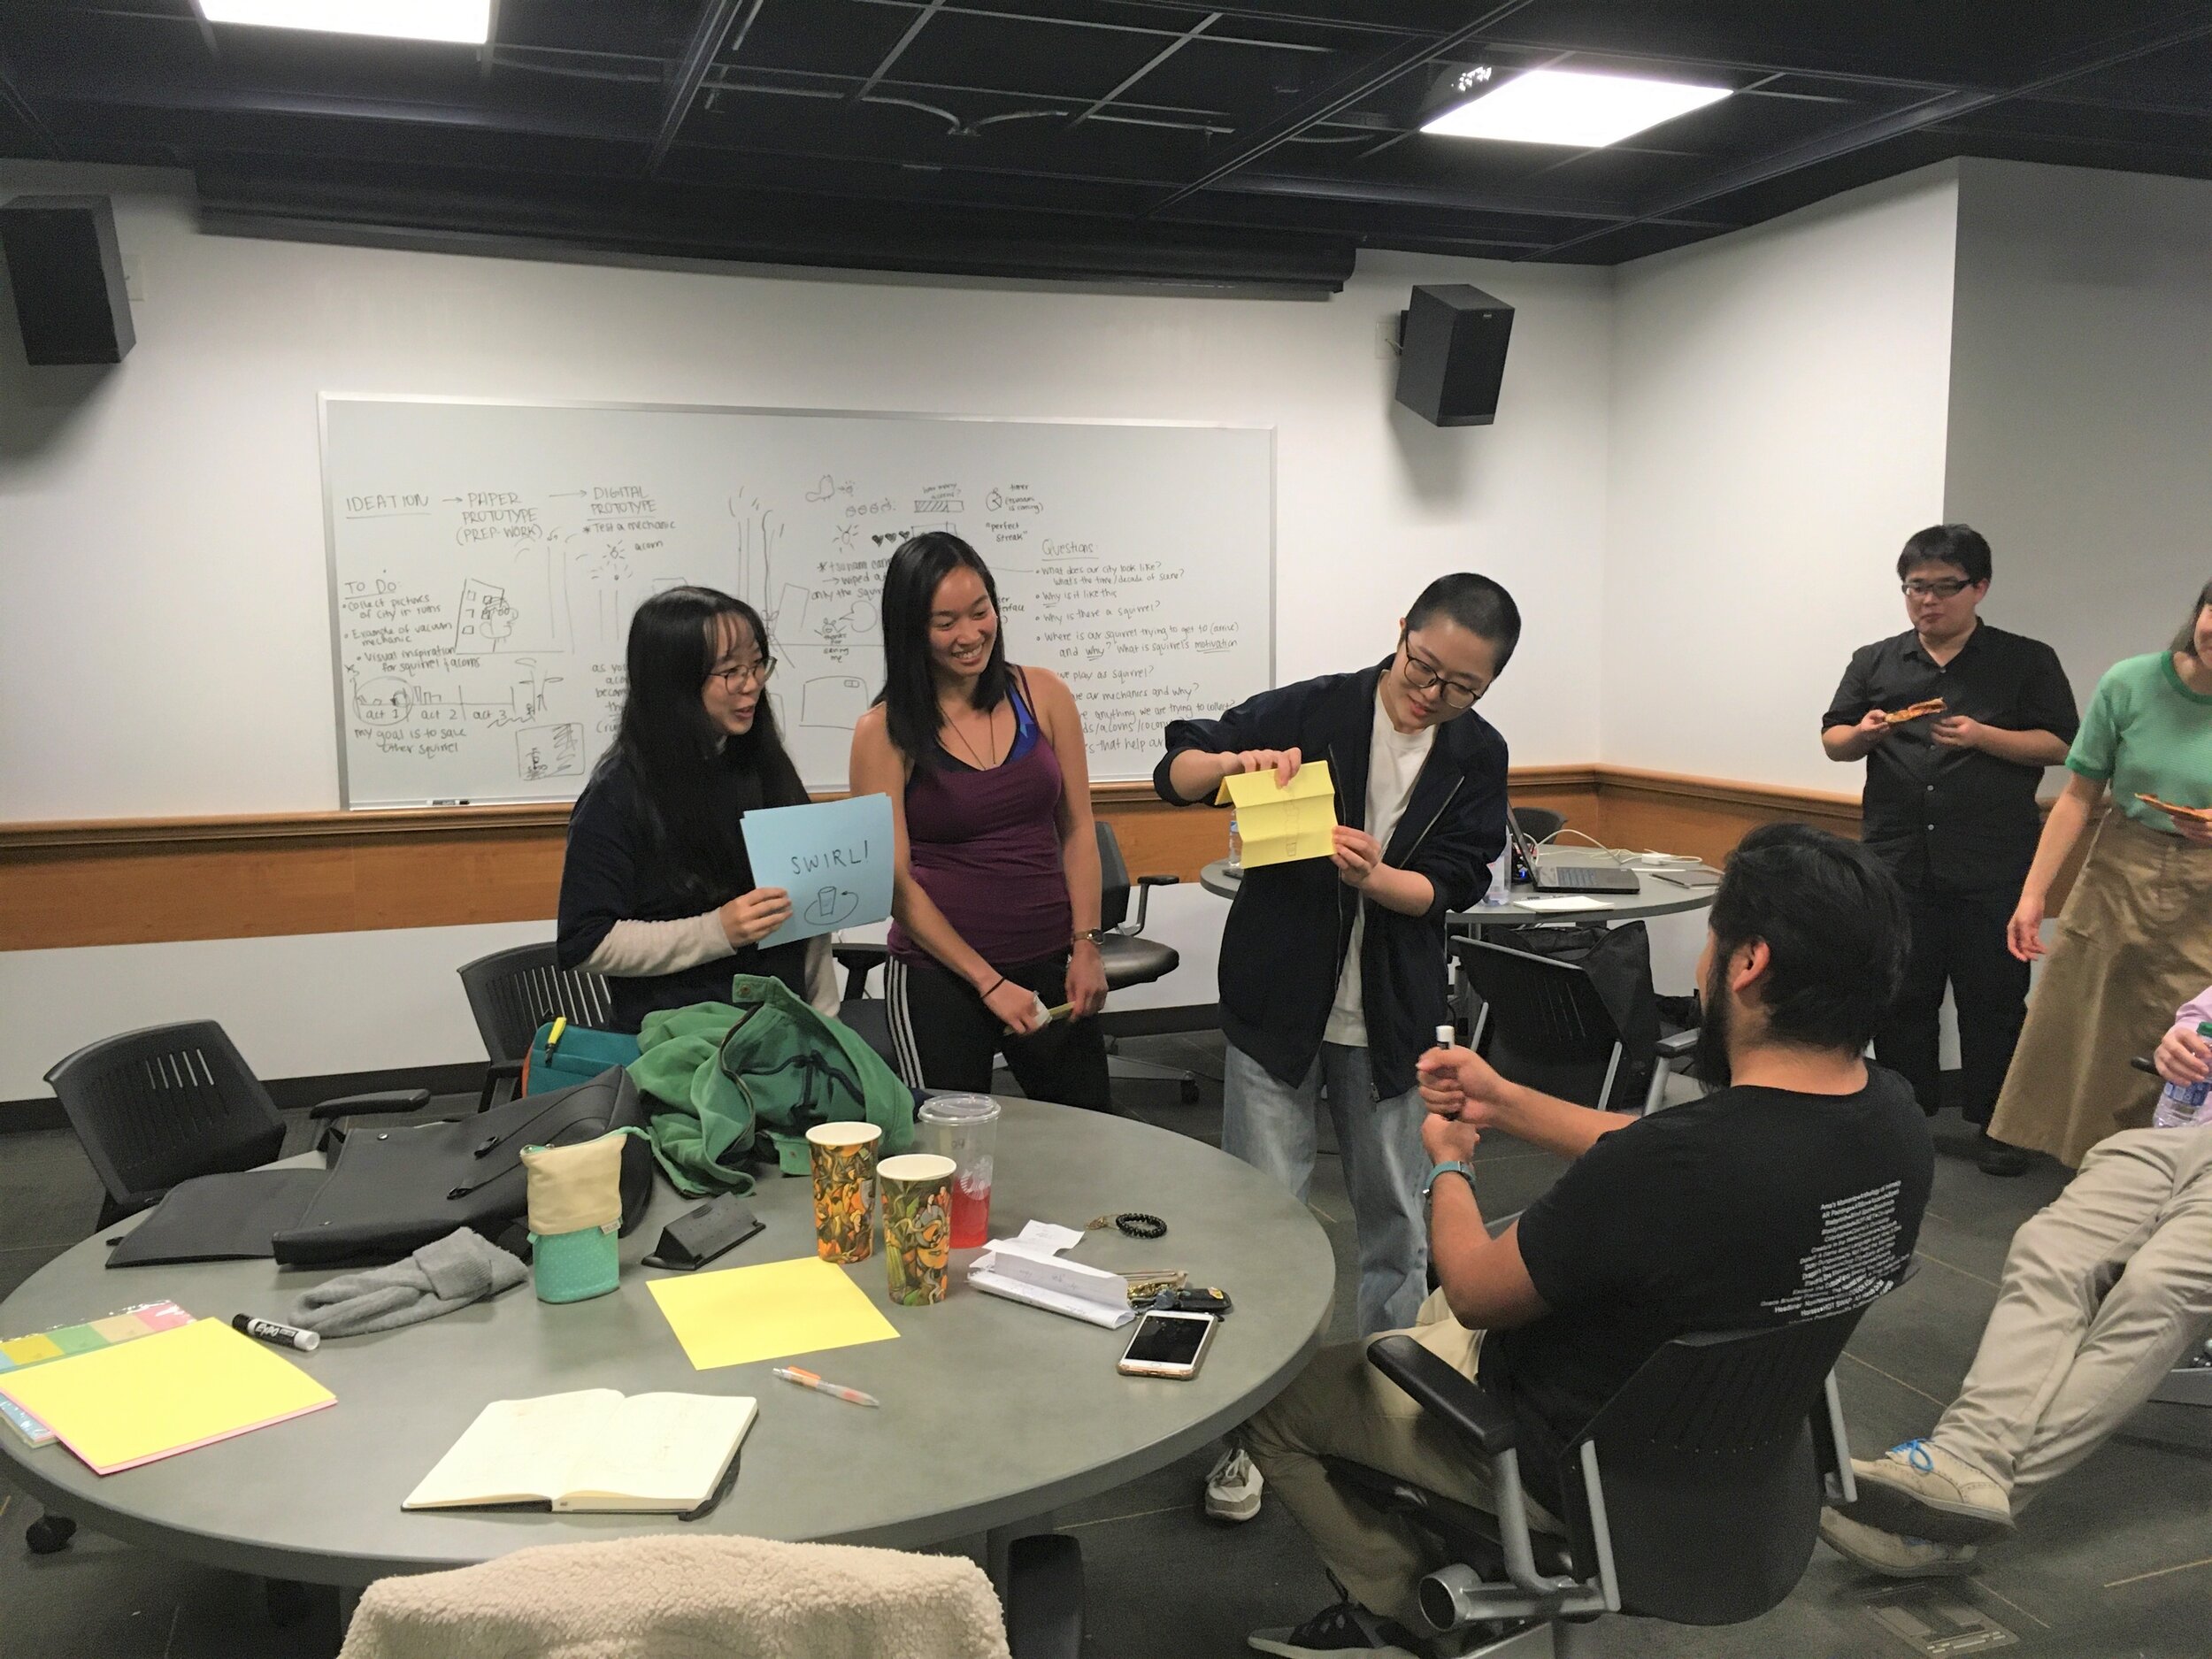  My teammates and I presenting our paper prototype to our peers and faculty. 